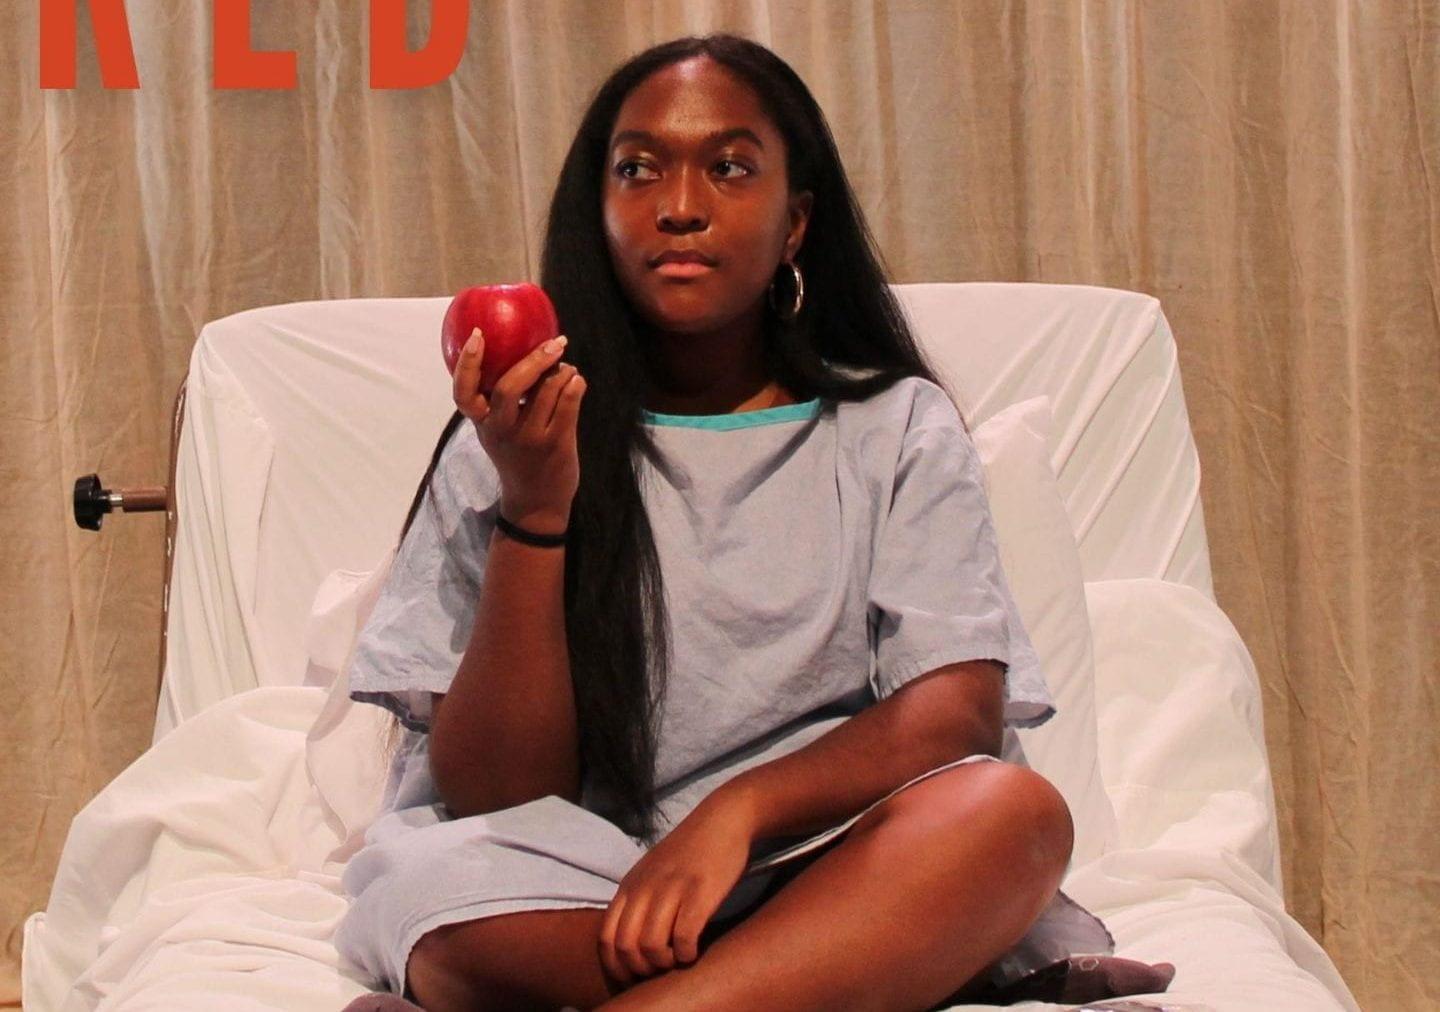 Image of person holding an apple in a hospital bed